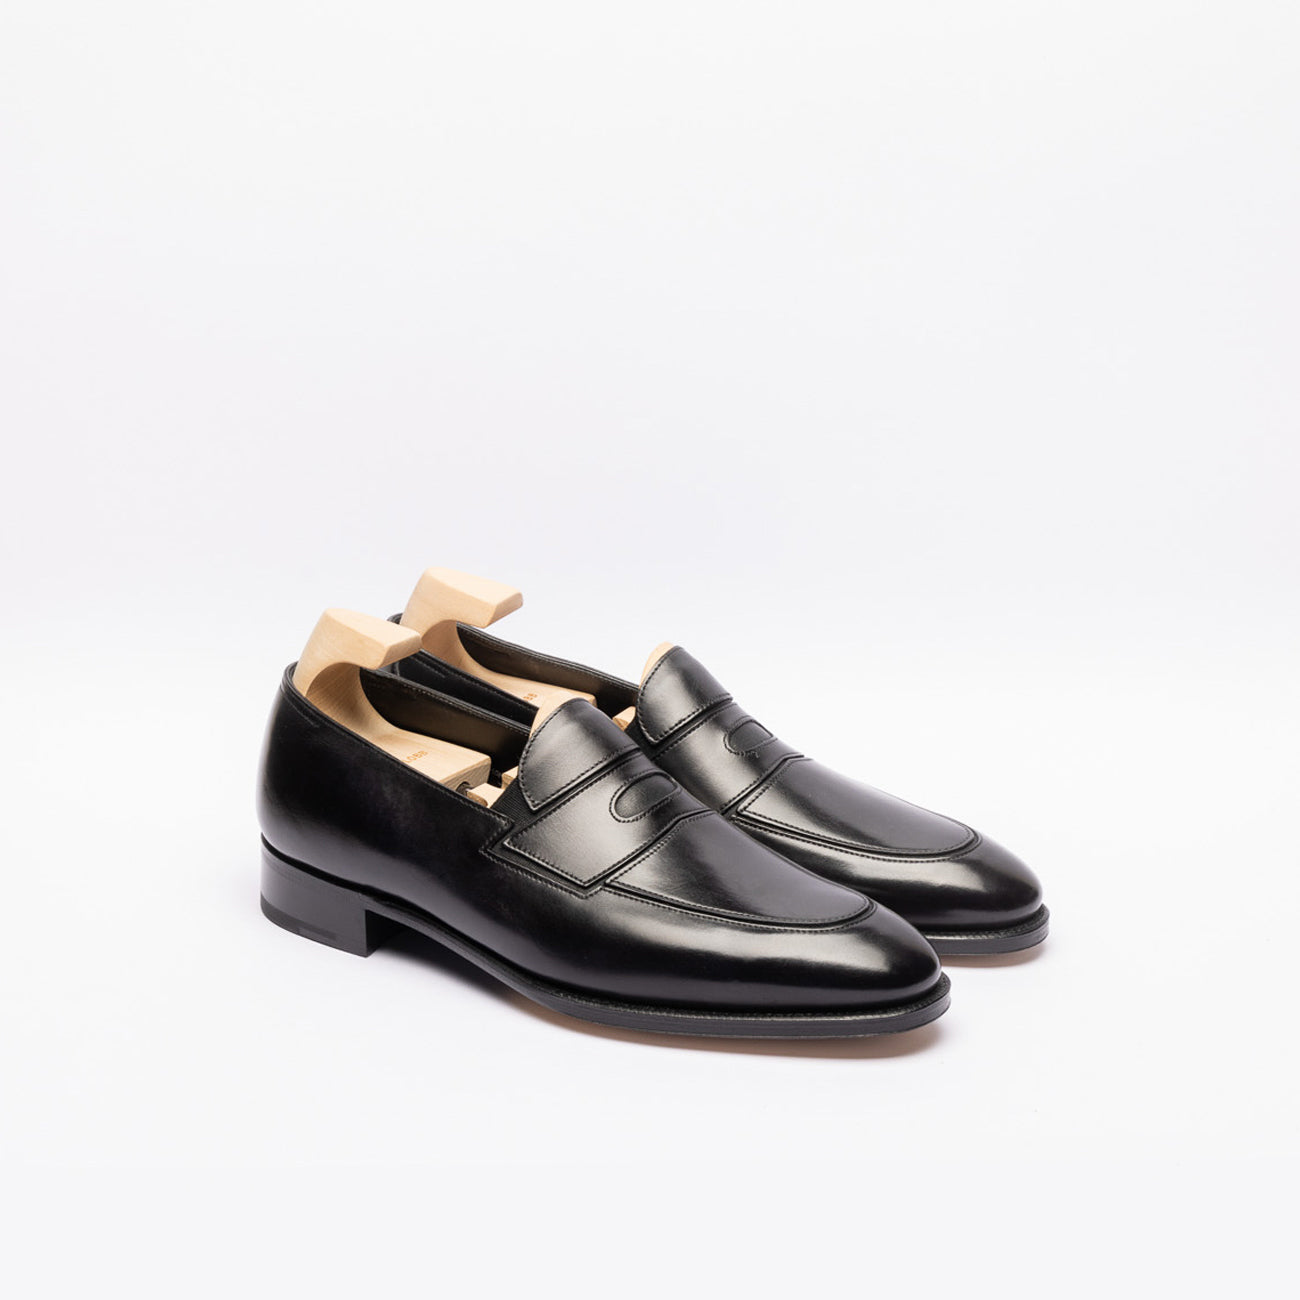 John Lobb Montgomery penny loafer in black leather